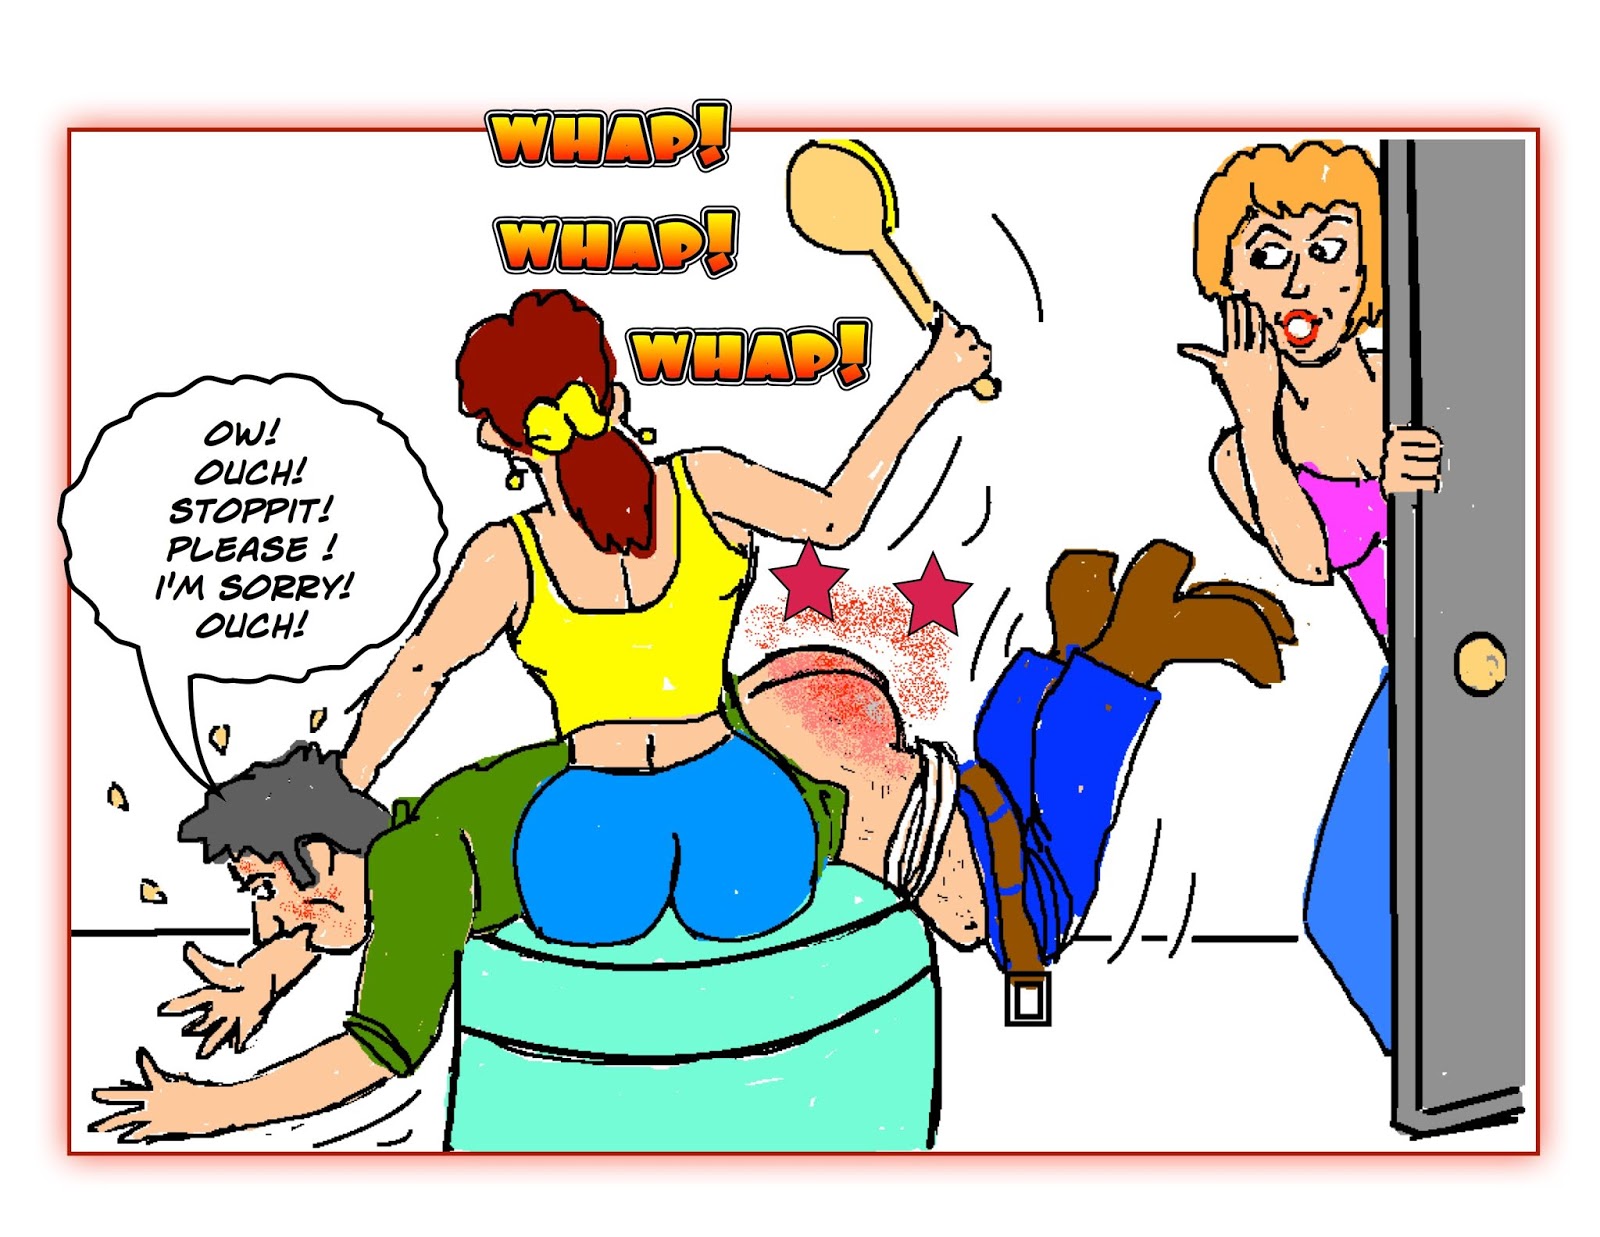 Sibling Rivalry - FM Spanking story.